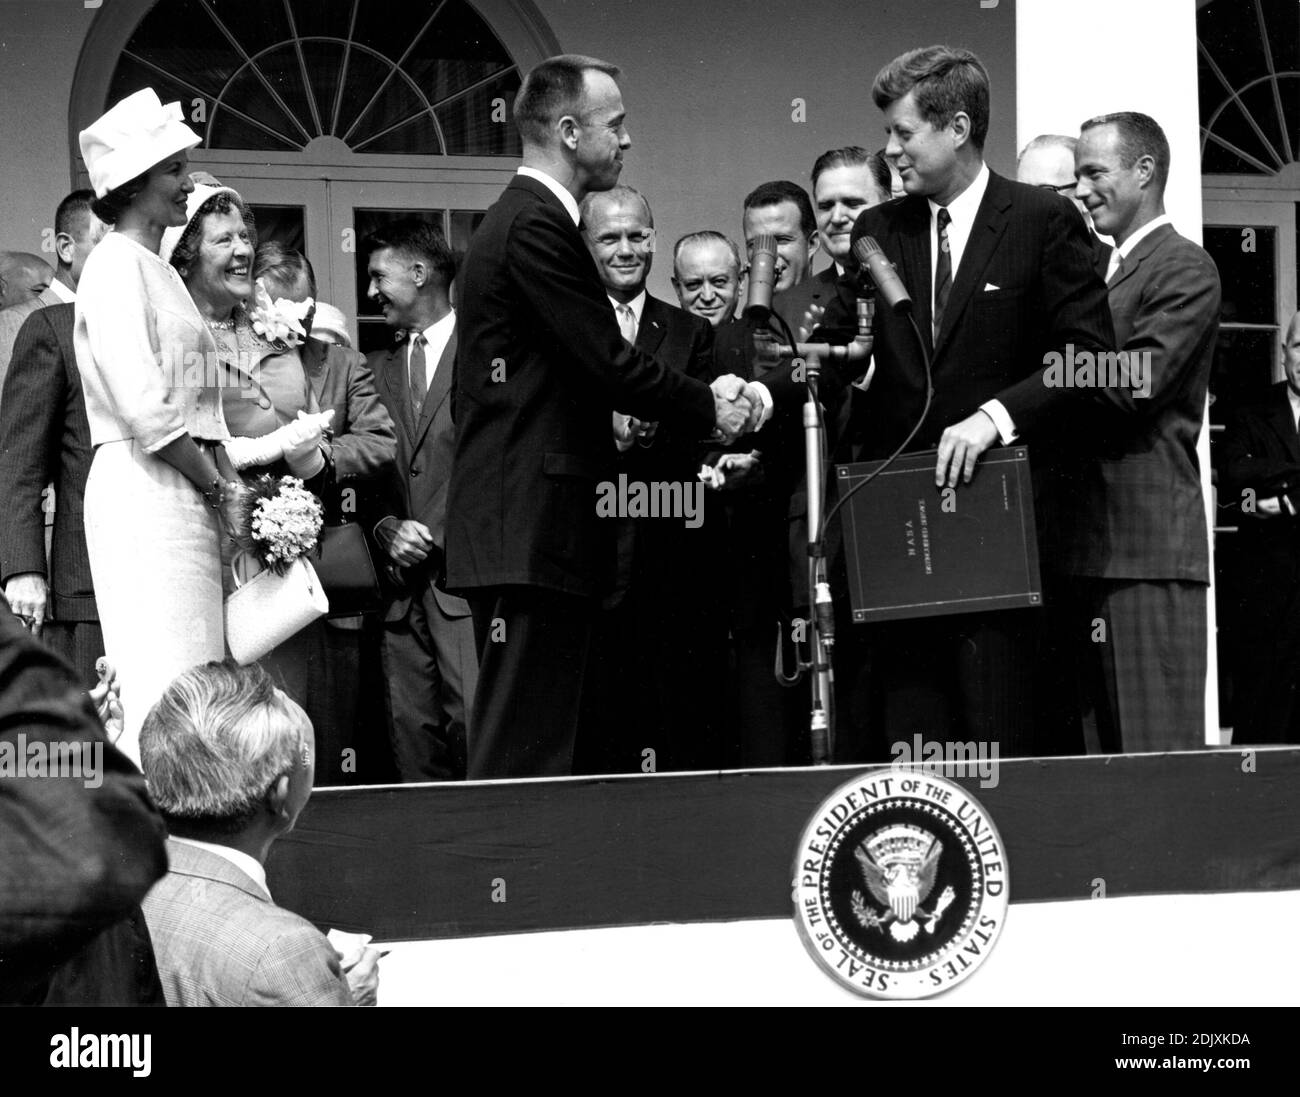 United States President John F. Kennedy congratulates astronaut Alan B. Shepard, Jr., the first American in space, on his historic May 5th, 1961 ride in the Freedom 7 spacecraft and presents him with the National Aeronautics and Space Administration (NASA) Distinguished Service Award, in Washington, D.C. on May 6, 1961. Shepard's wife, Louise (left in white dress and hat), and his mother were in attendance as well as the other six Mercury astronauts, including Colonel John H. Glenn, Jr. and other NASA officals, some visible in the background. Photo by NASA via CNP/ABACAPRESS.COM Stock Photo